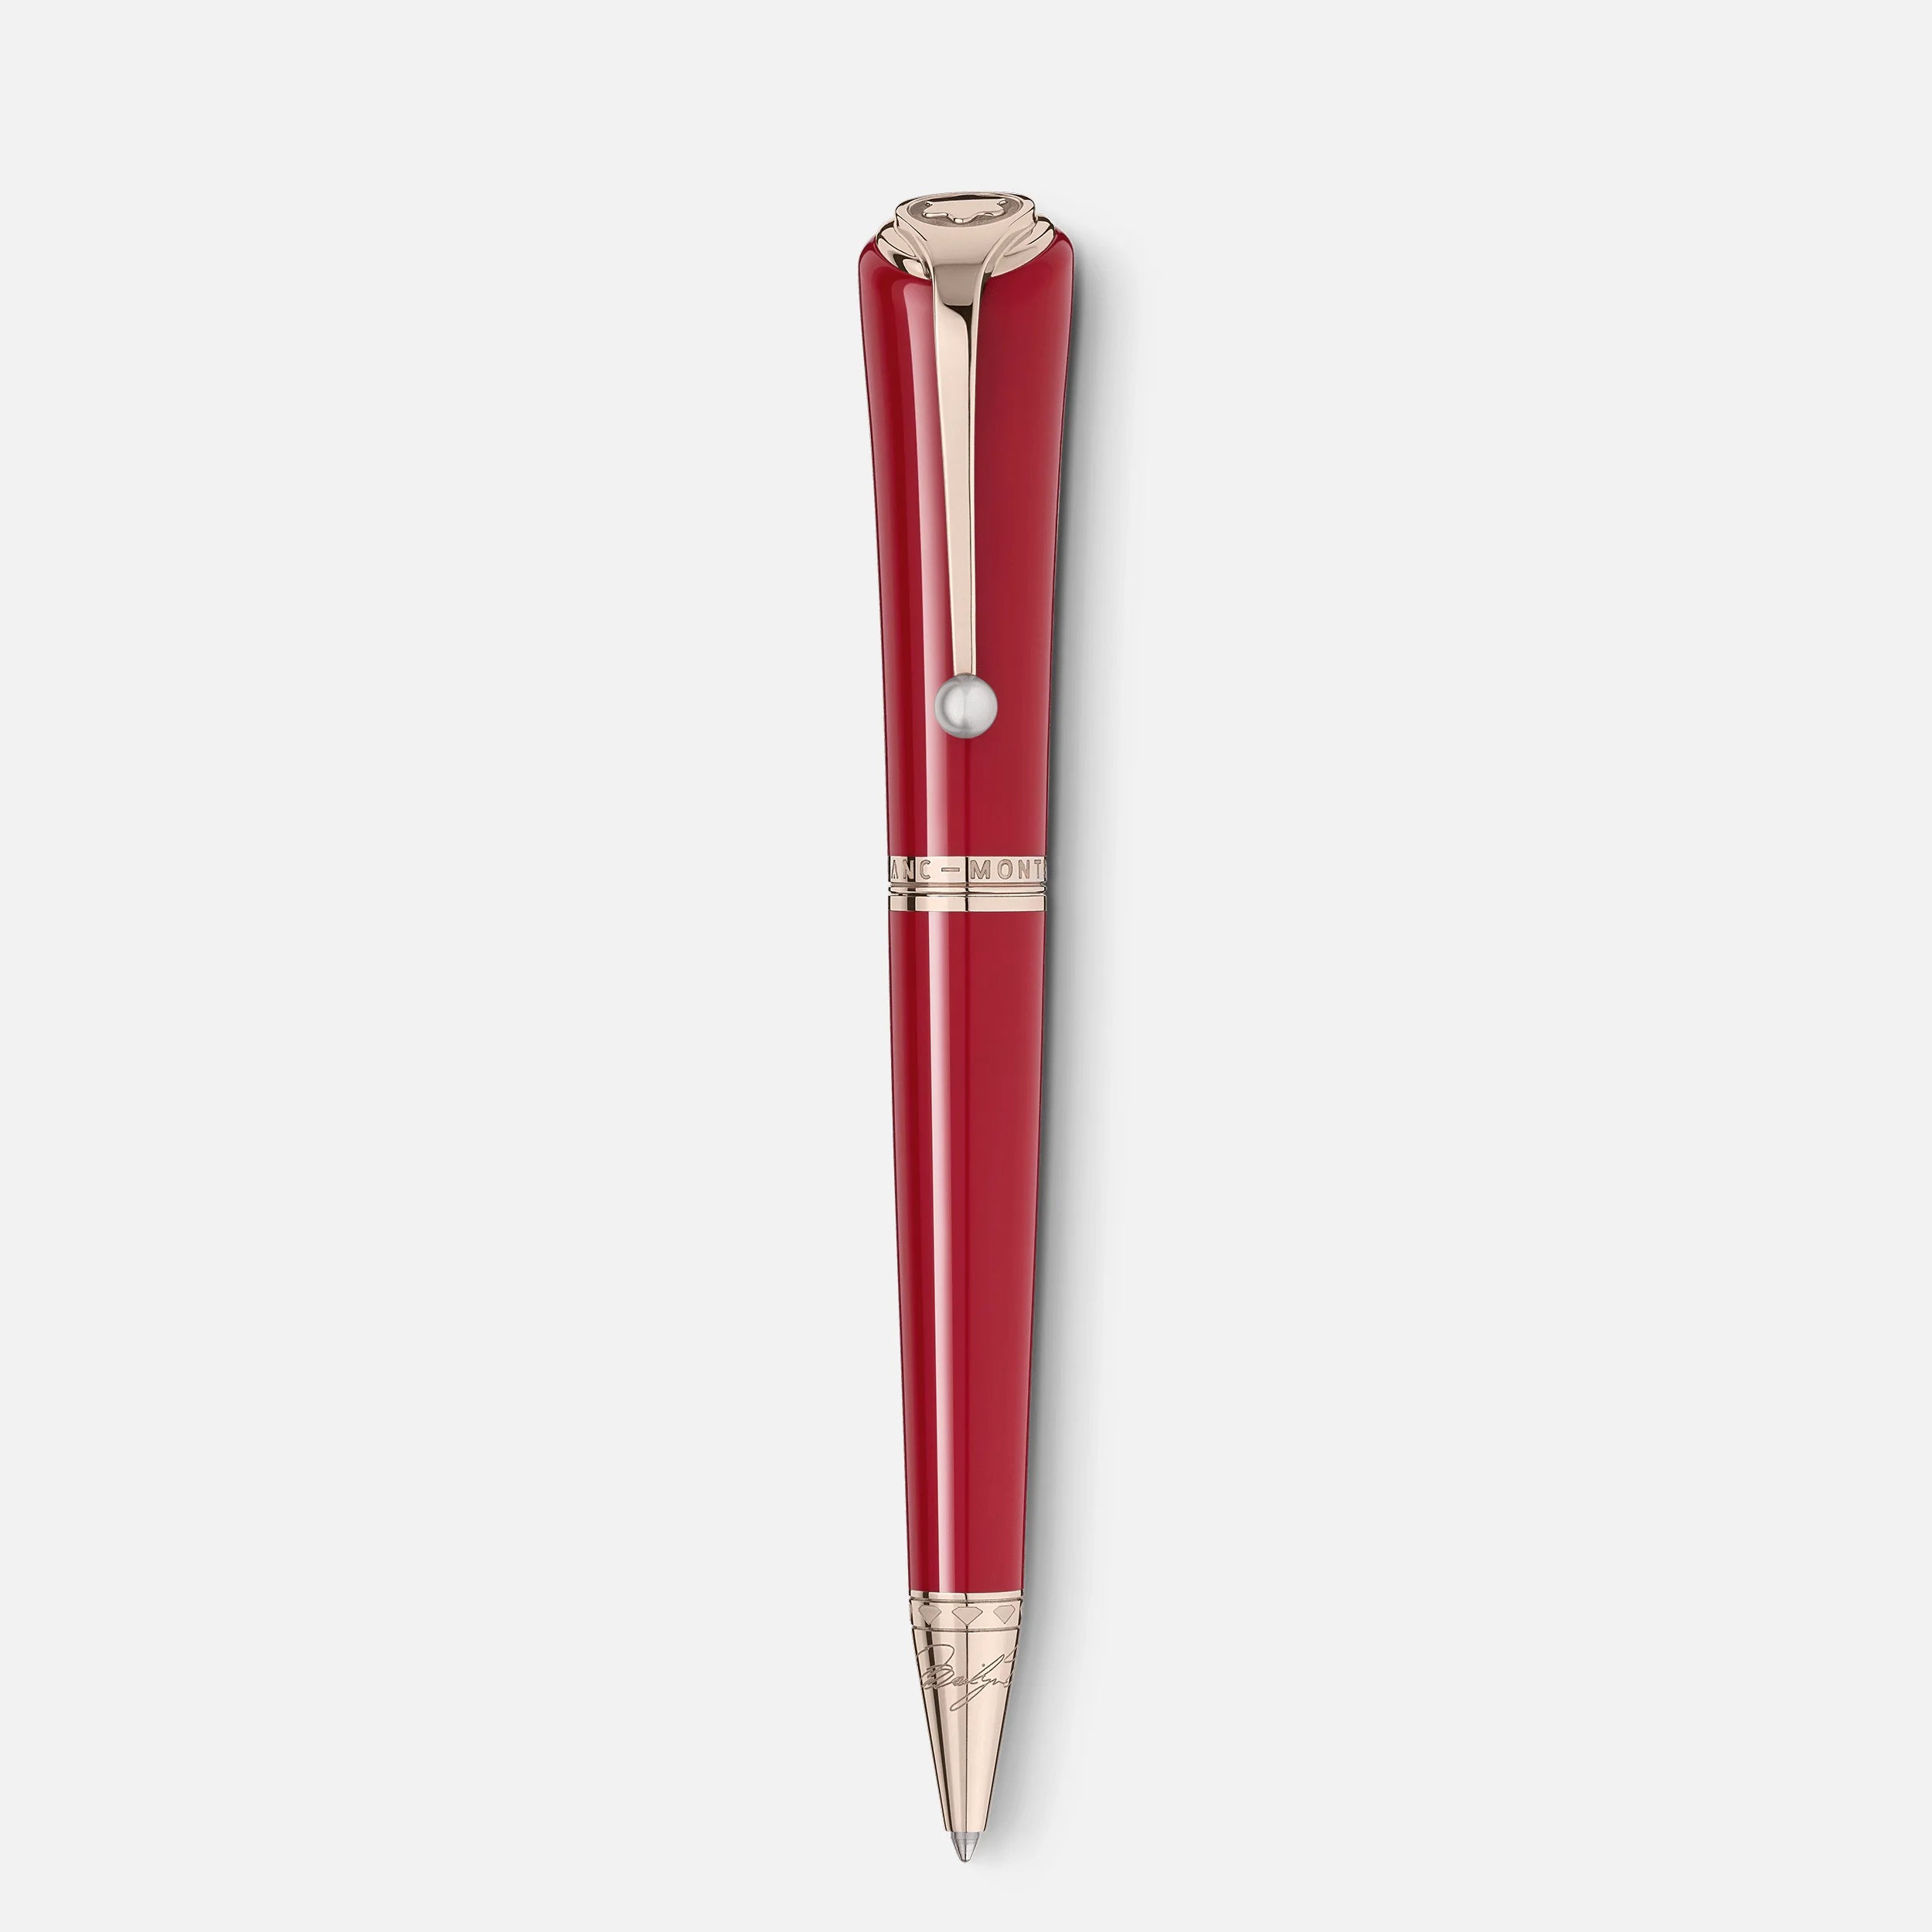 MONTBLANC | Penna a sfera Muses Marilyn Monroe Edizione Speciale | MB116068